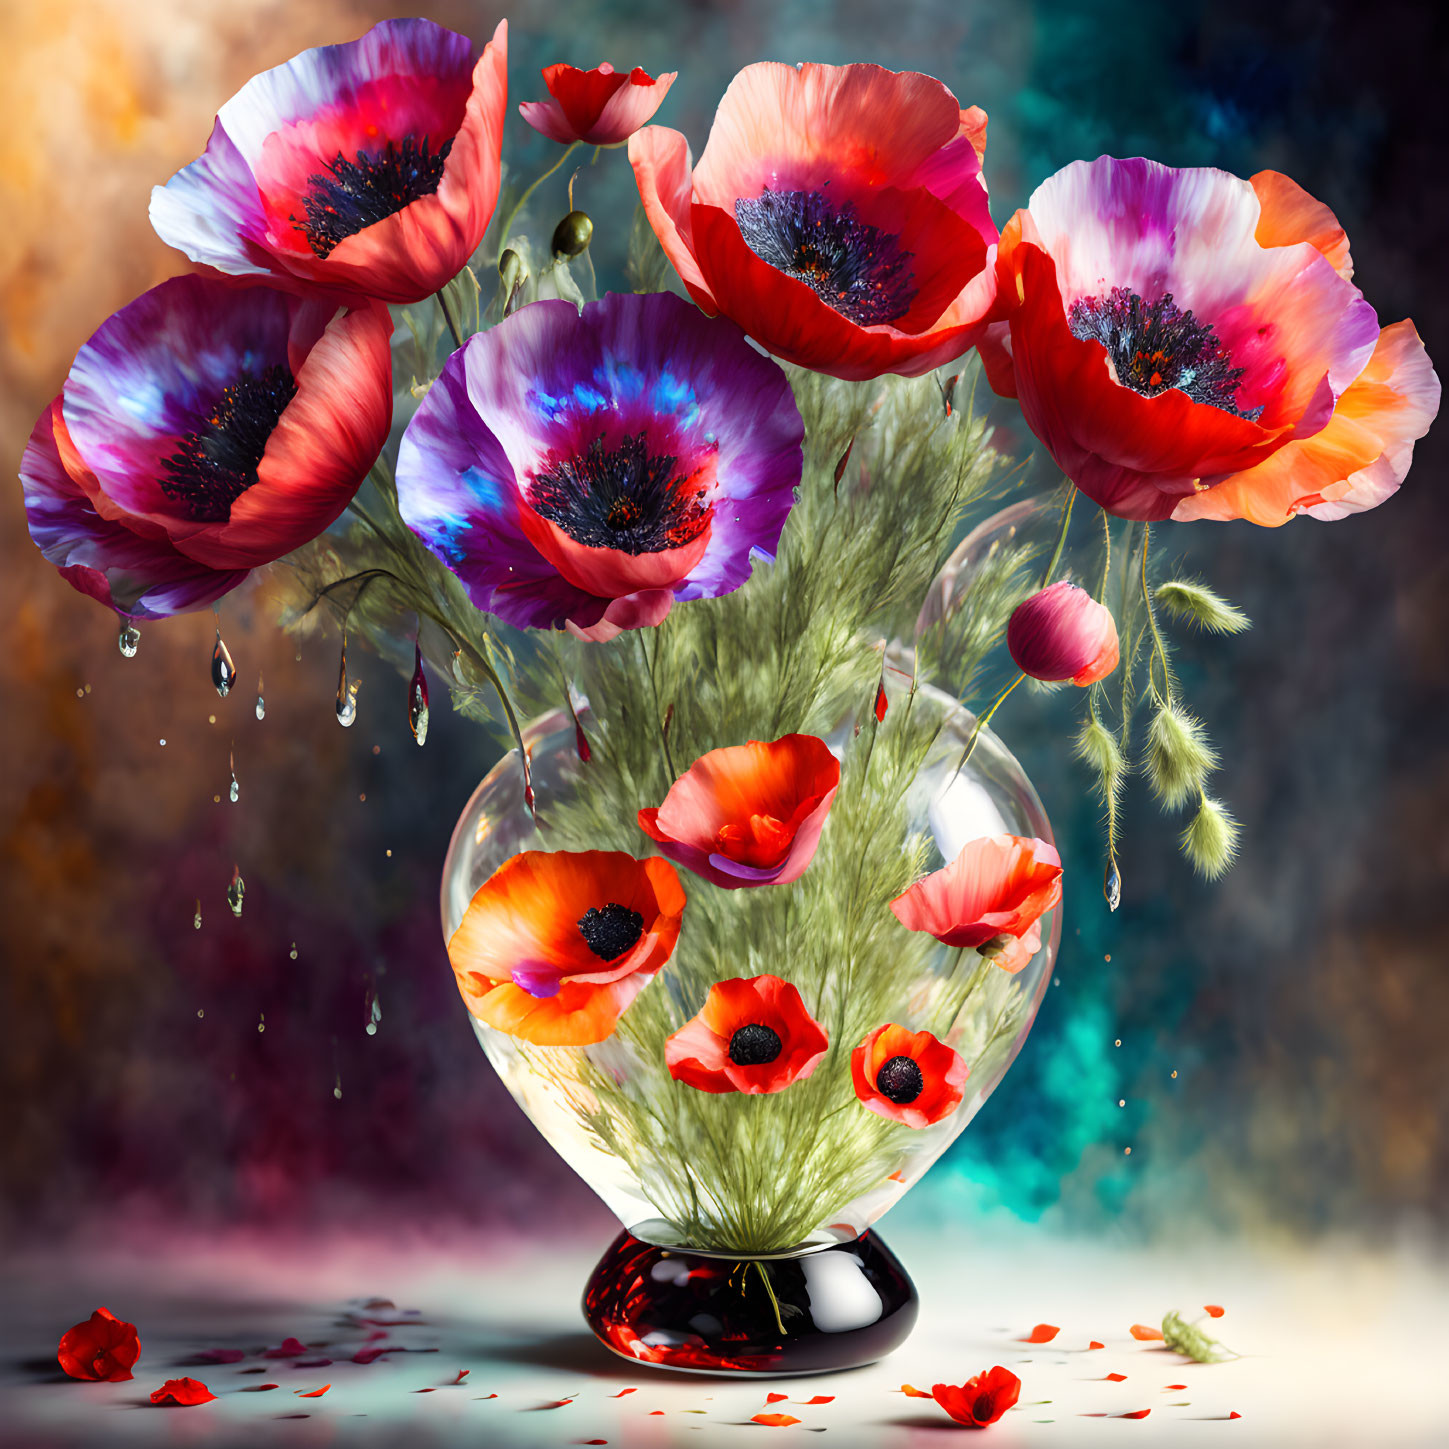 Multicolored poppies bouquet in glass vase with water droplets and petals on bokeh background